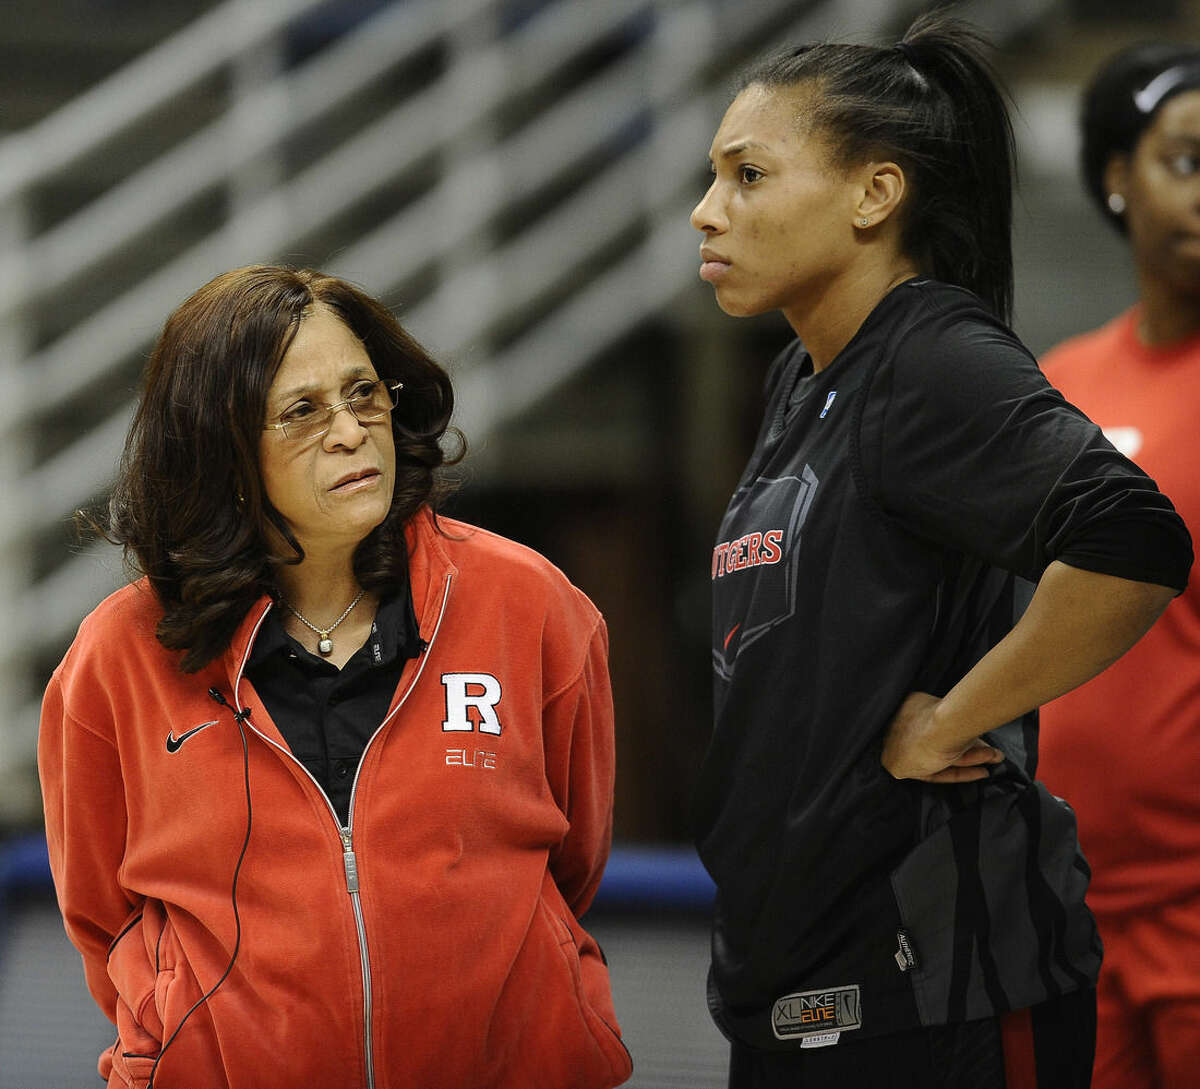 Rutgers head coach C. Vivian Stringer, left, stands with Betnijah Laney during practice for a women's college basketball NCAA tournament first round game, Friday, March 20, 2015, in Storrs, Conn. Rutgers plays Seton Hall on Saturday. (AP Photo/Jessica Hill)